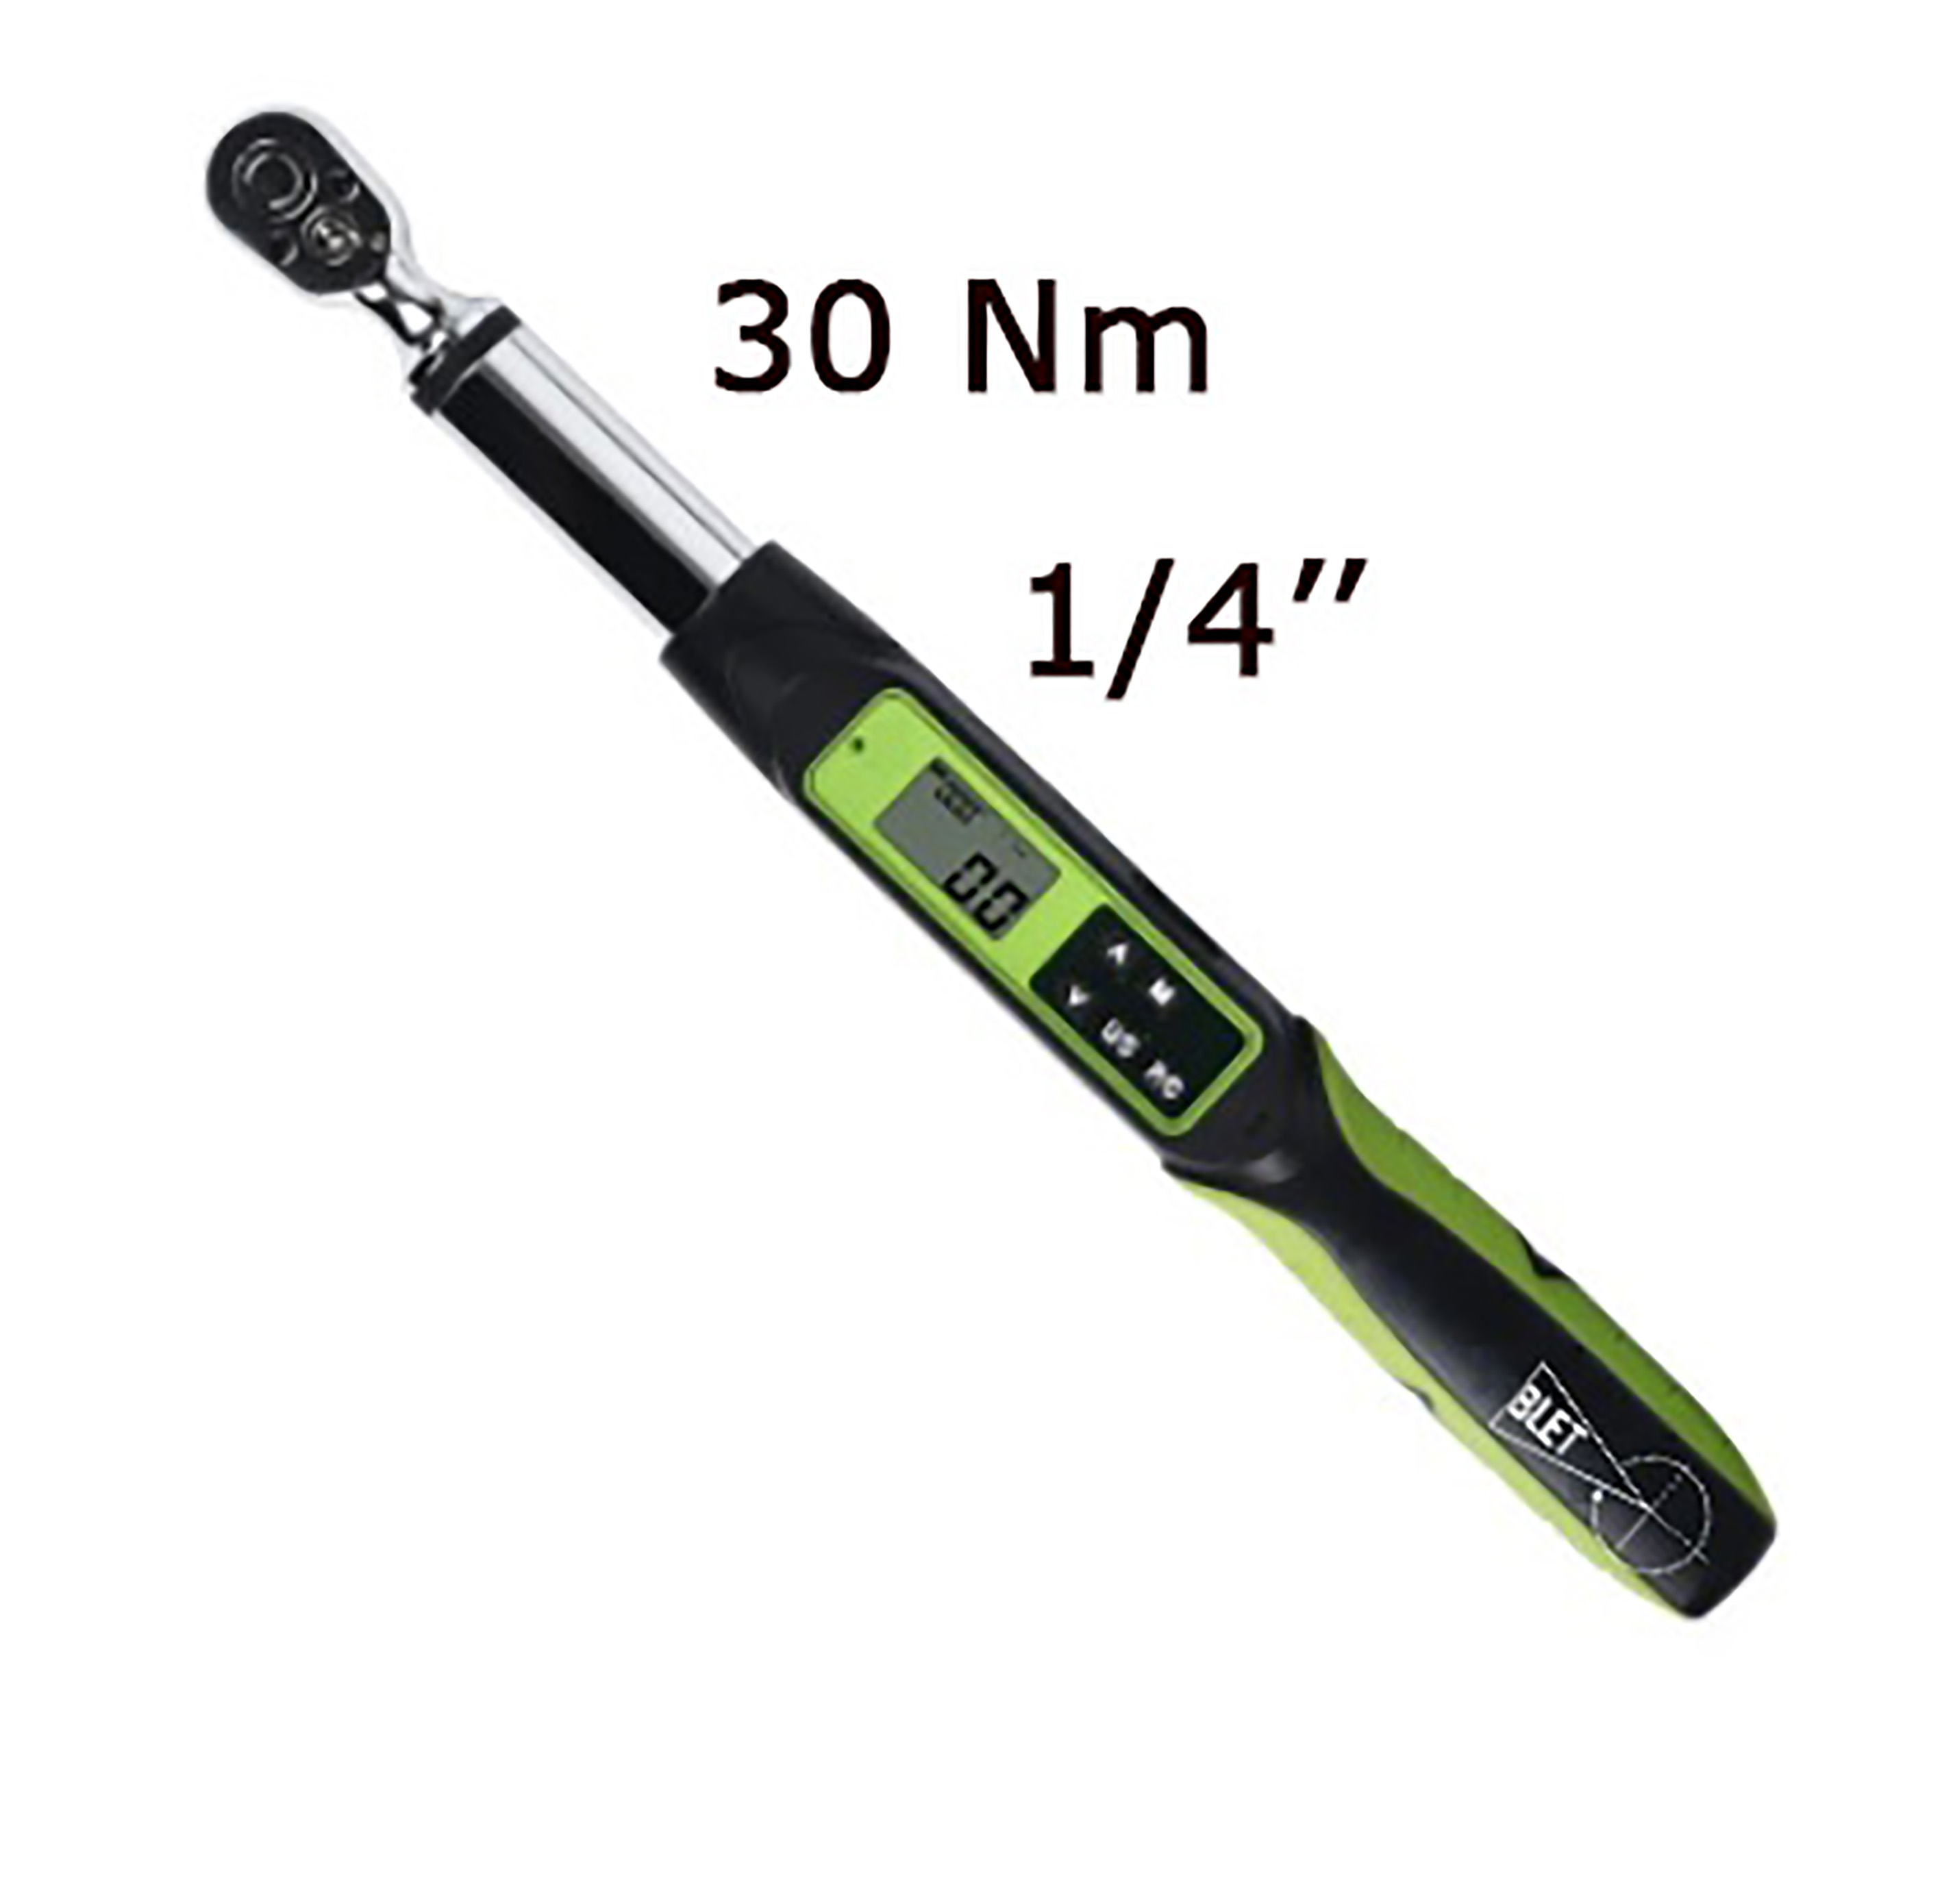 DIGITAL TORQUE ANGLE WRENCH WITH COMMUNICATION 30 Nm READING 0,01 Nm SIZE 1/4" BLET<br>Ref : CLET5-CDB03014